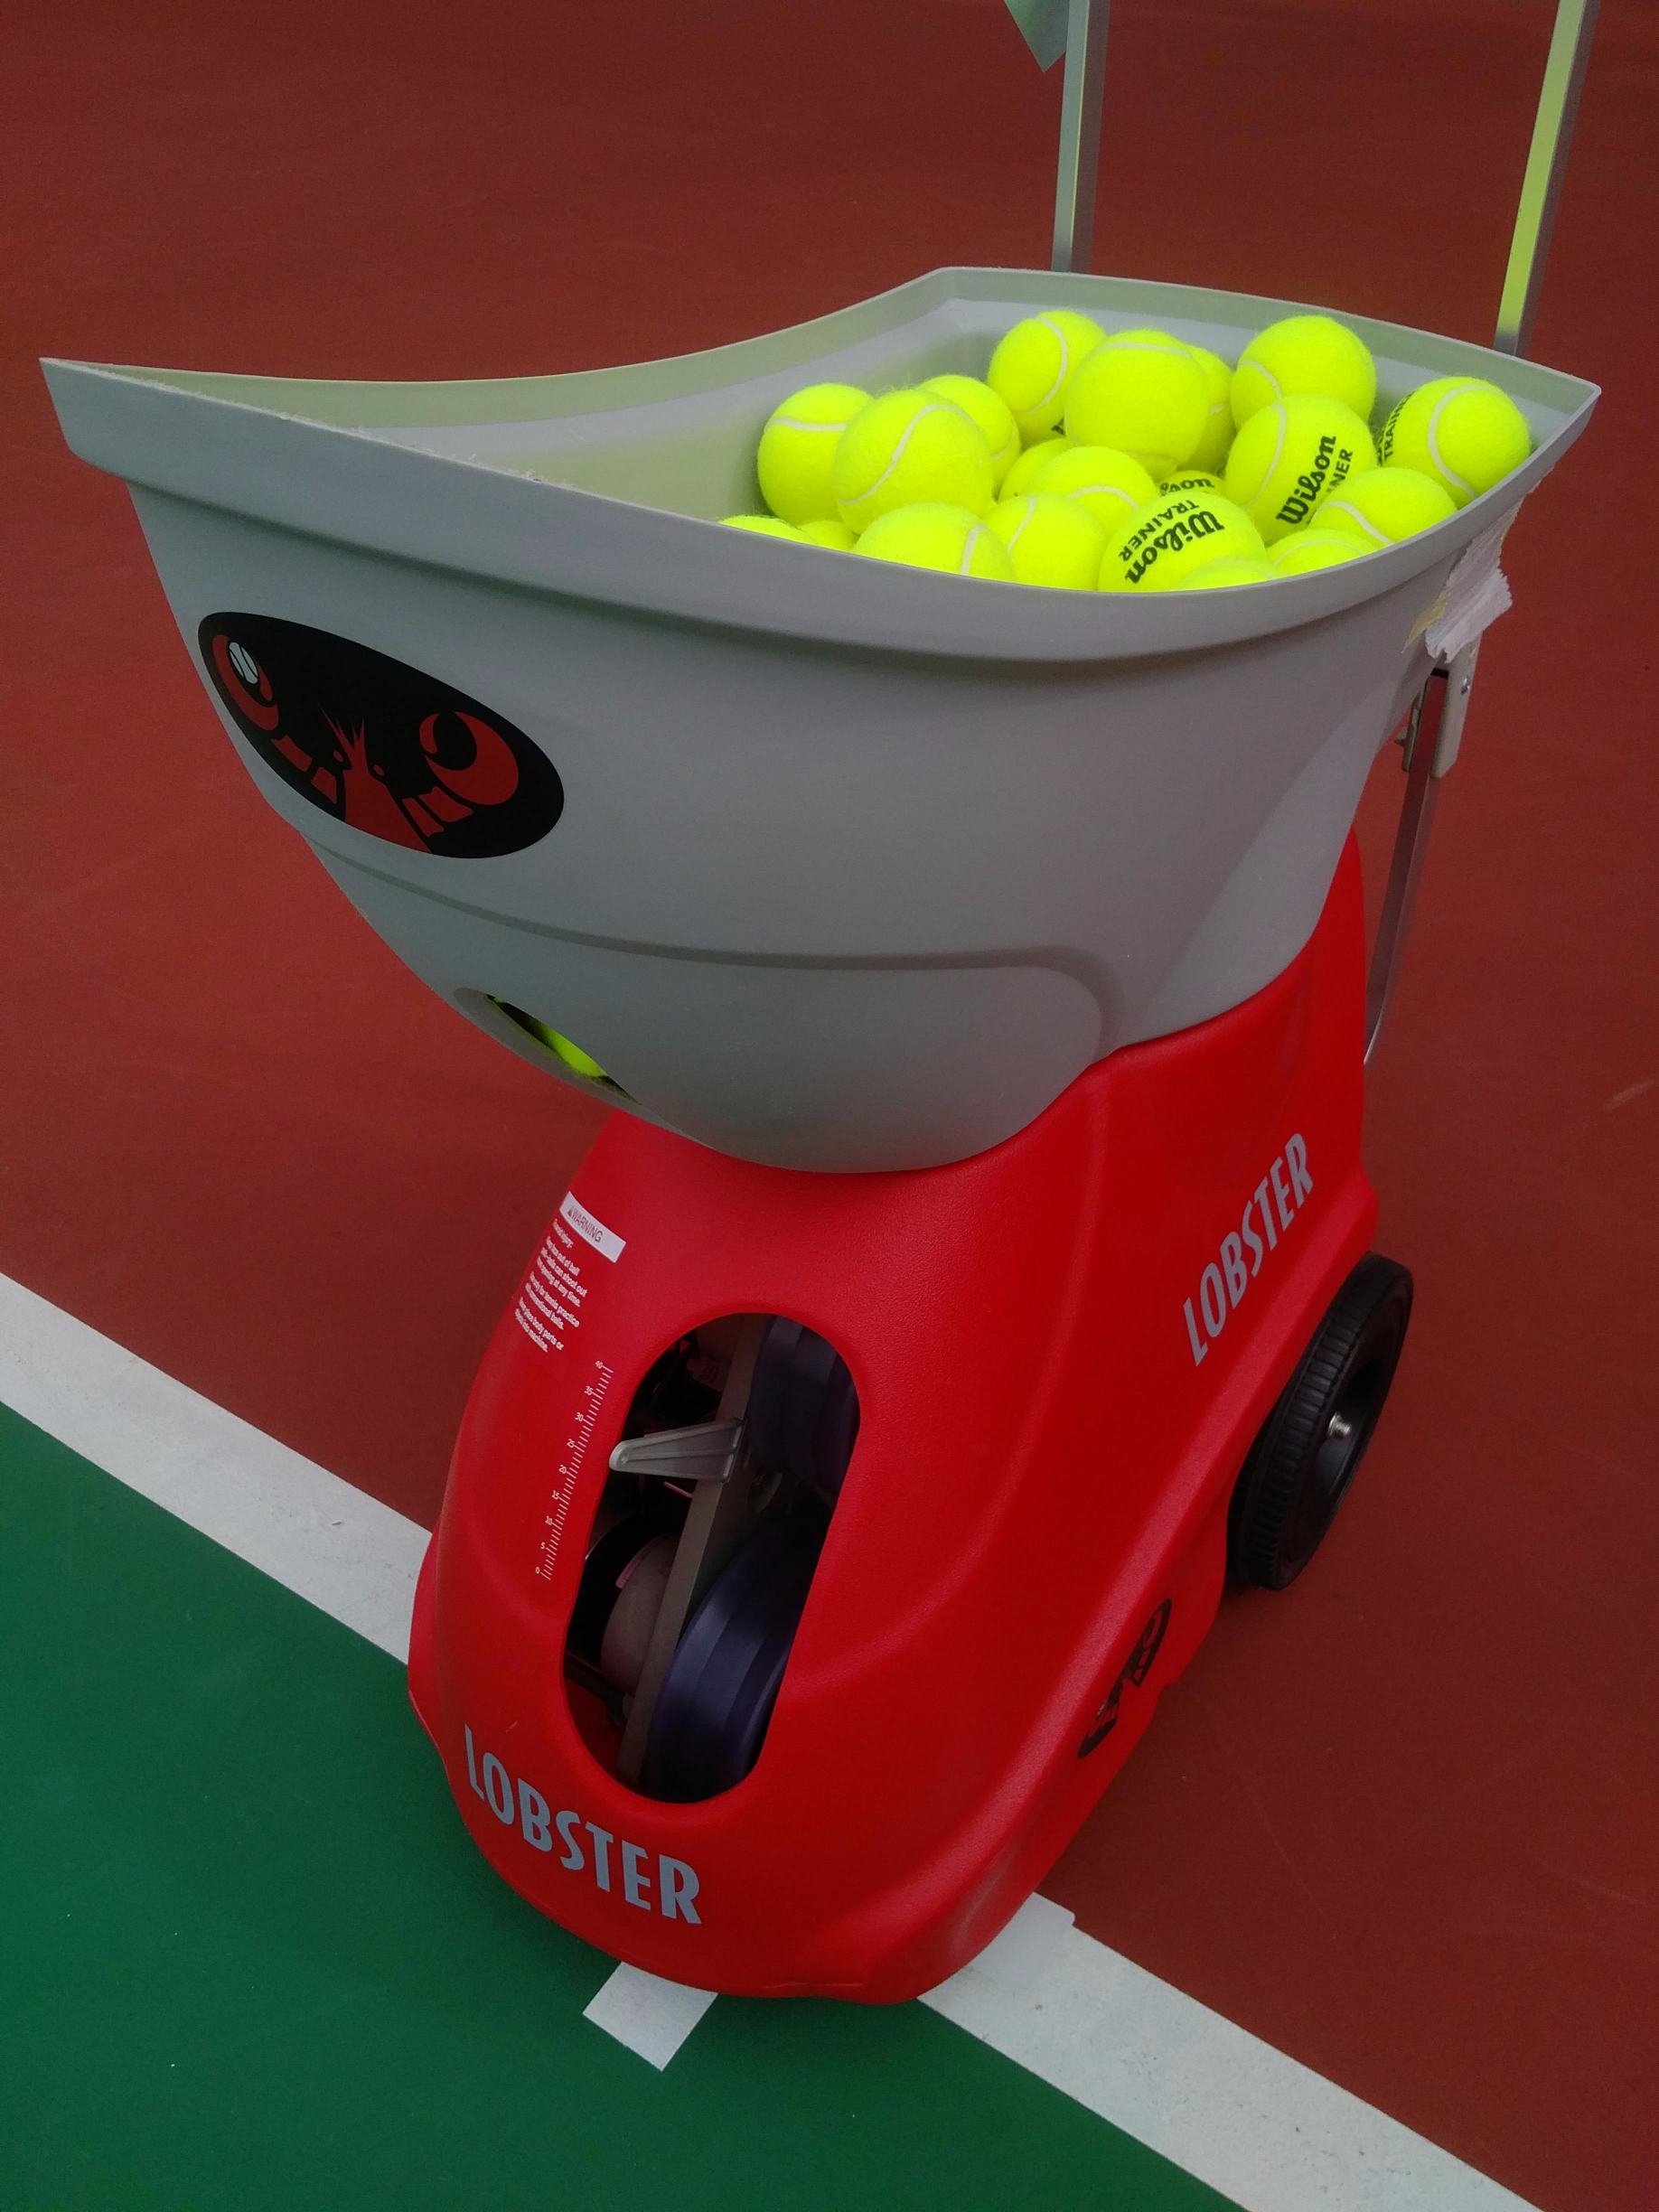 Detail Lobster Tennis Ball Machine For Sale Nomer 11